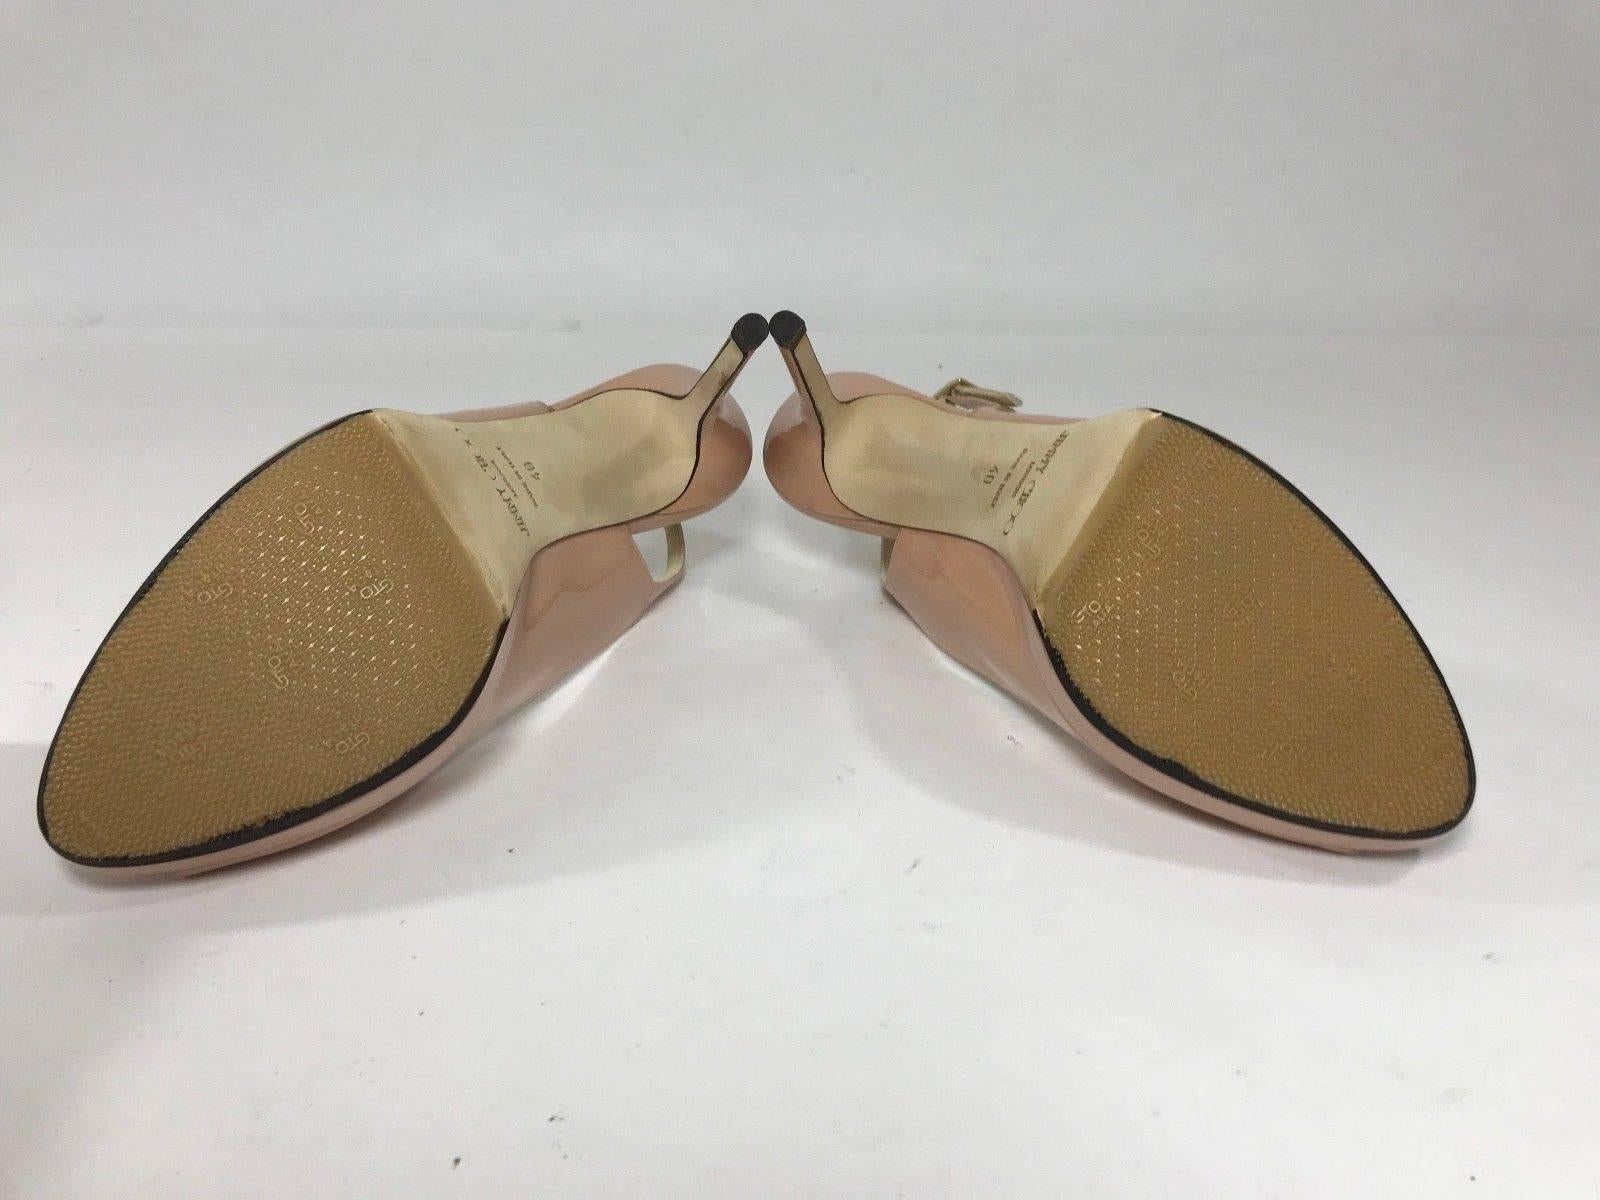 Jimmy Choo Nova Slingback Blush Patent Pump  In New Condition For Sale In Saint Charles, IL